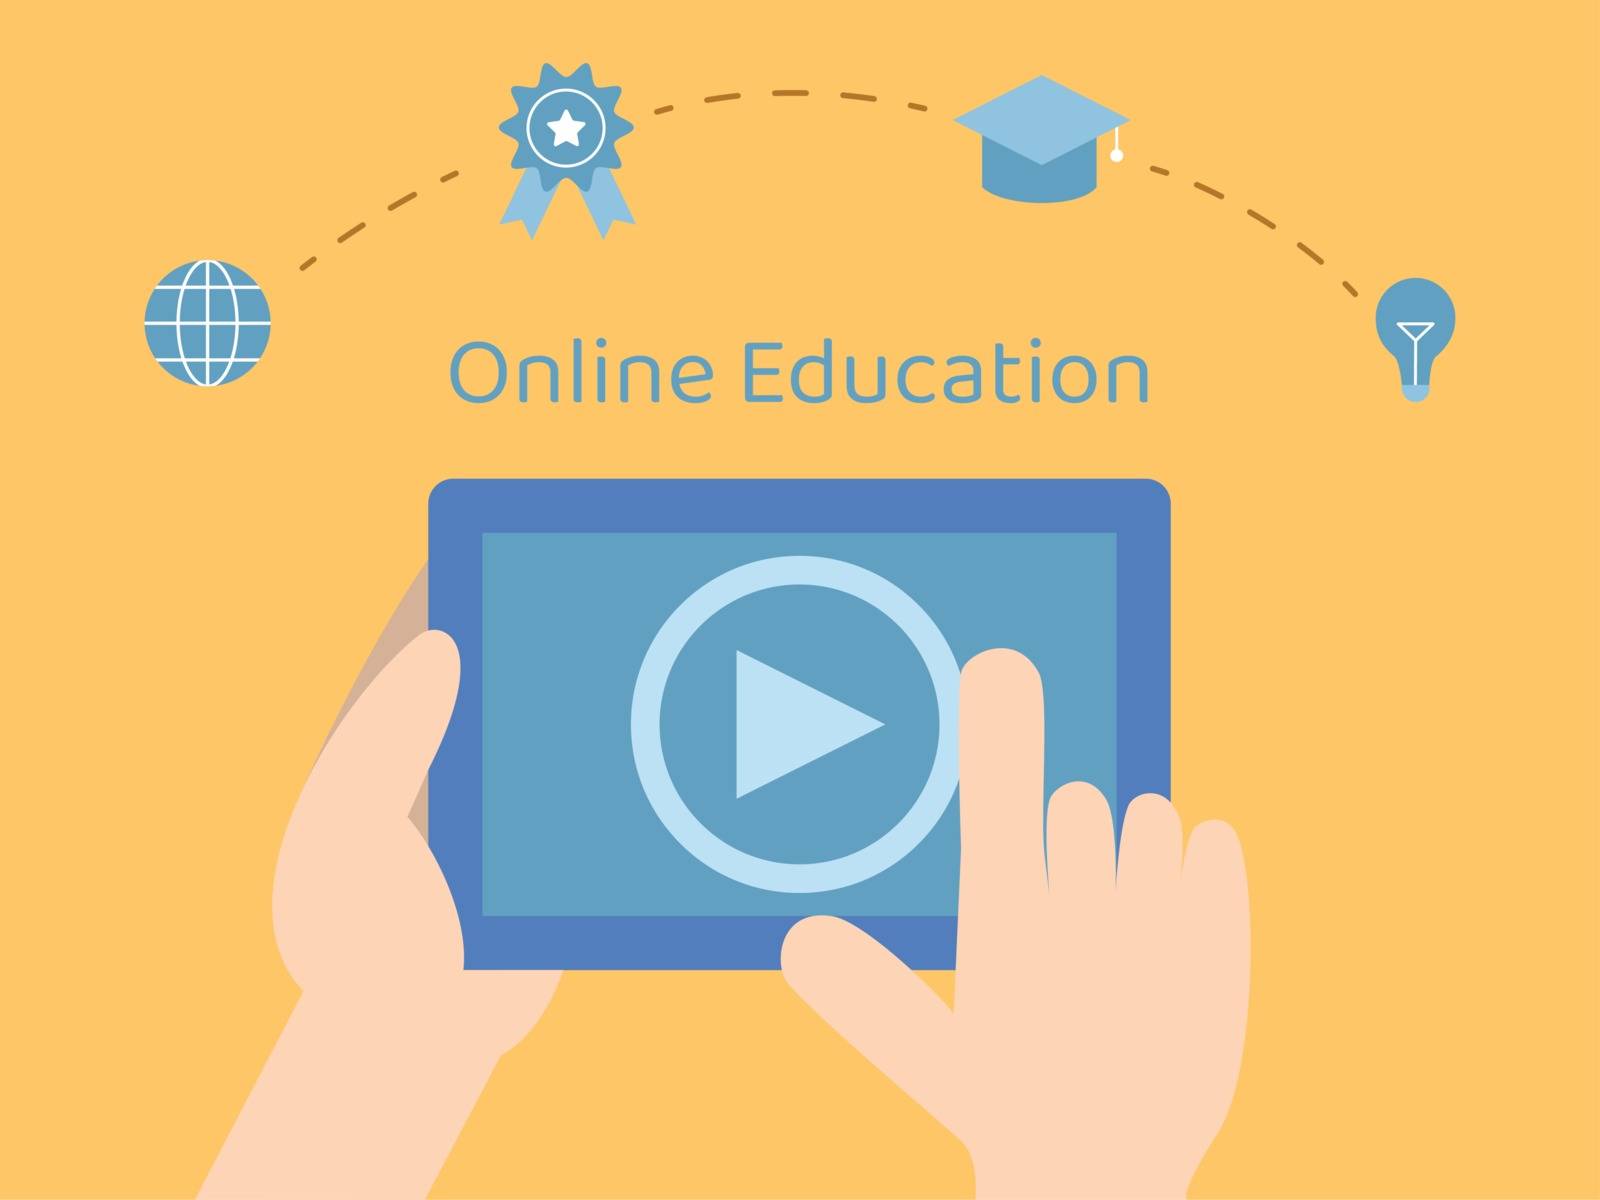 Online course in tablet. Illustration about E-learning and Online course.